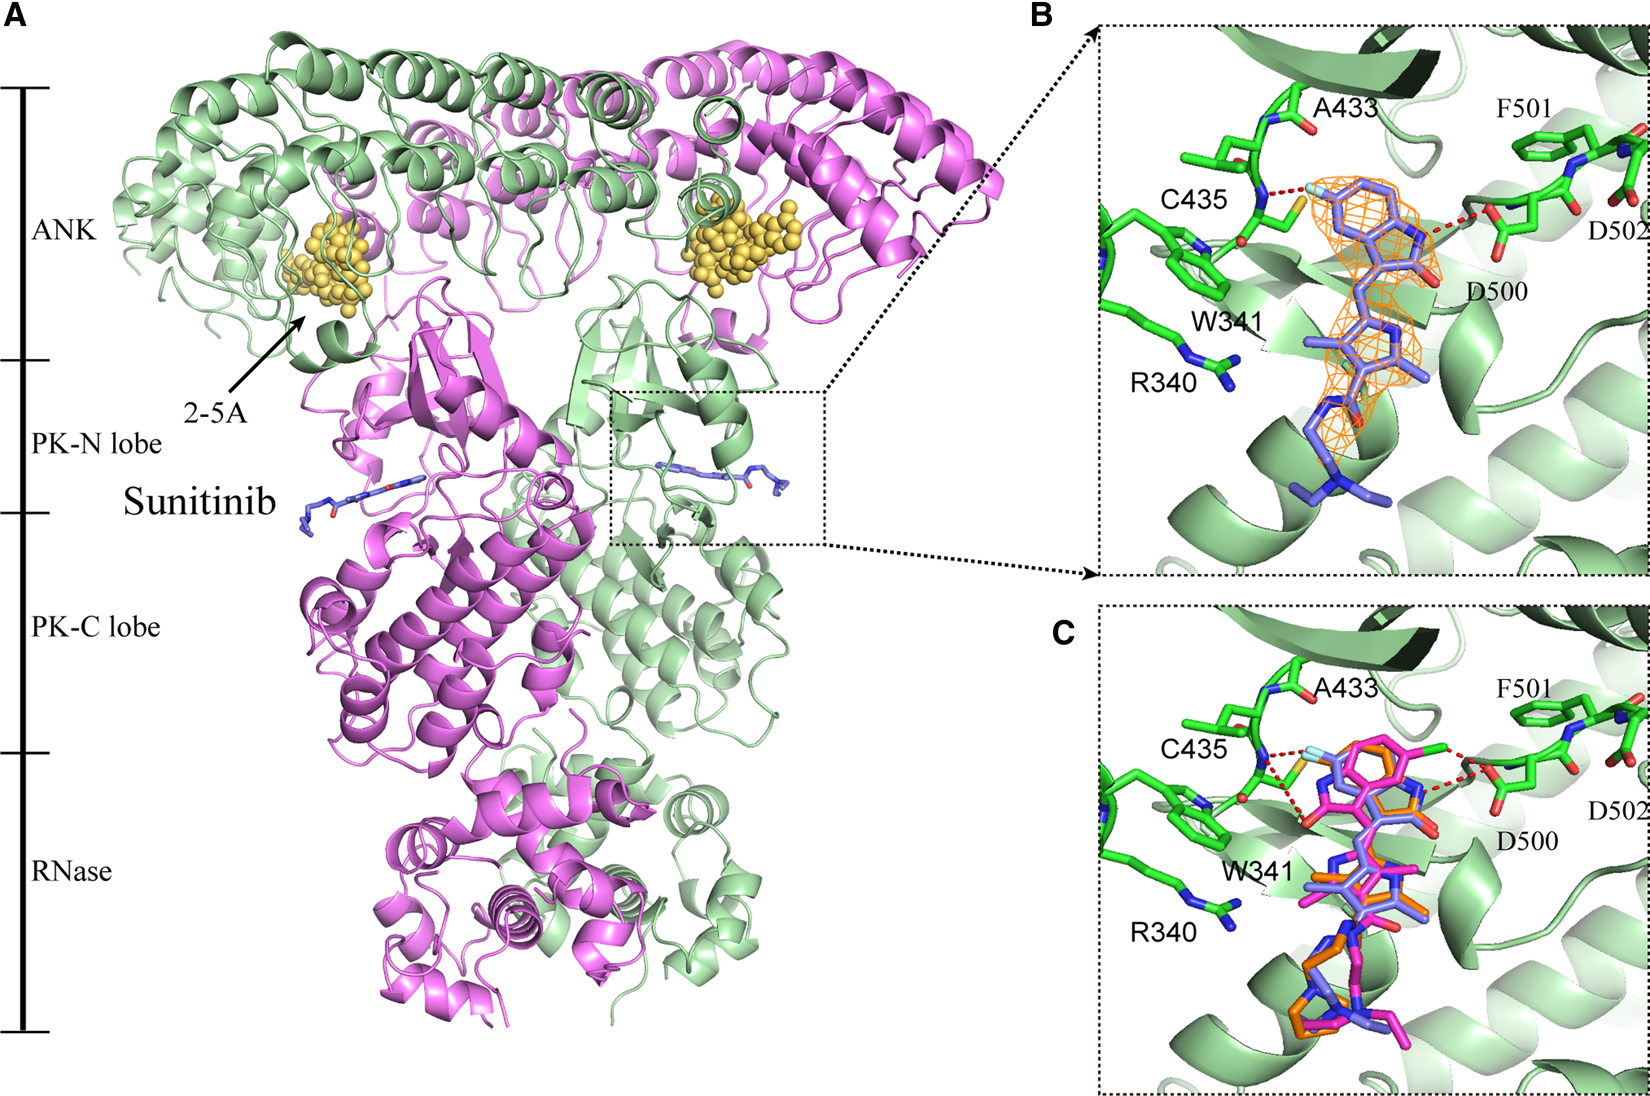 Tertiary structures of RNase L dimer in complex with sunitinib analogs